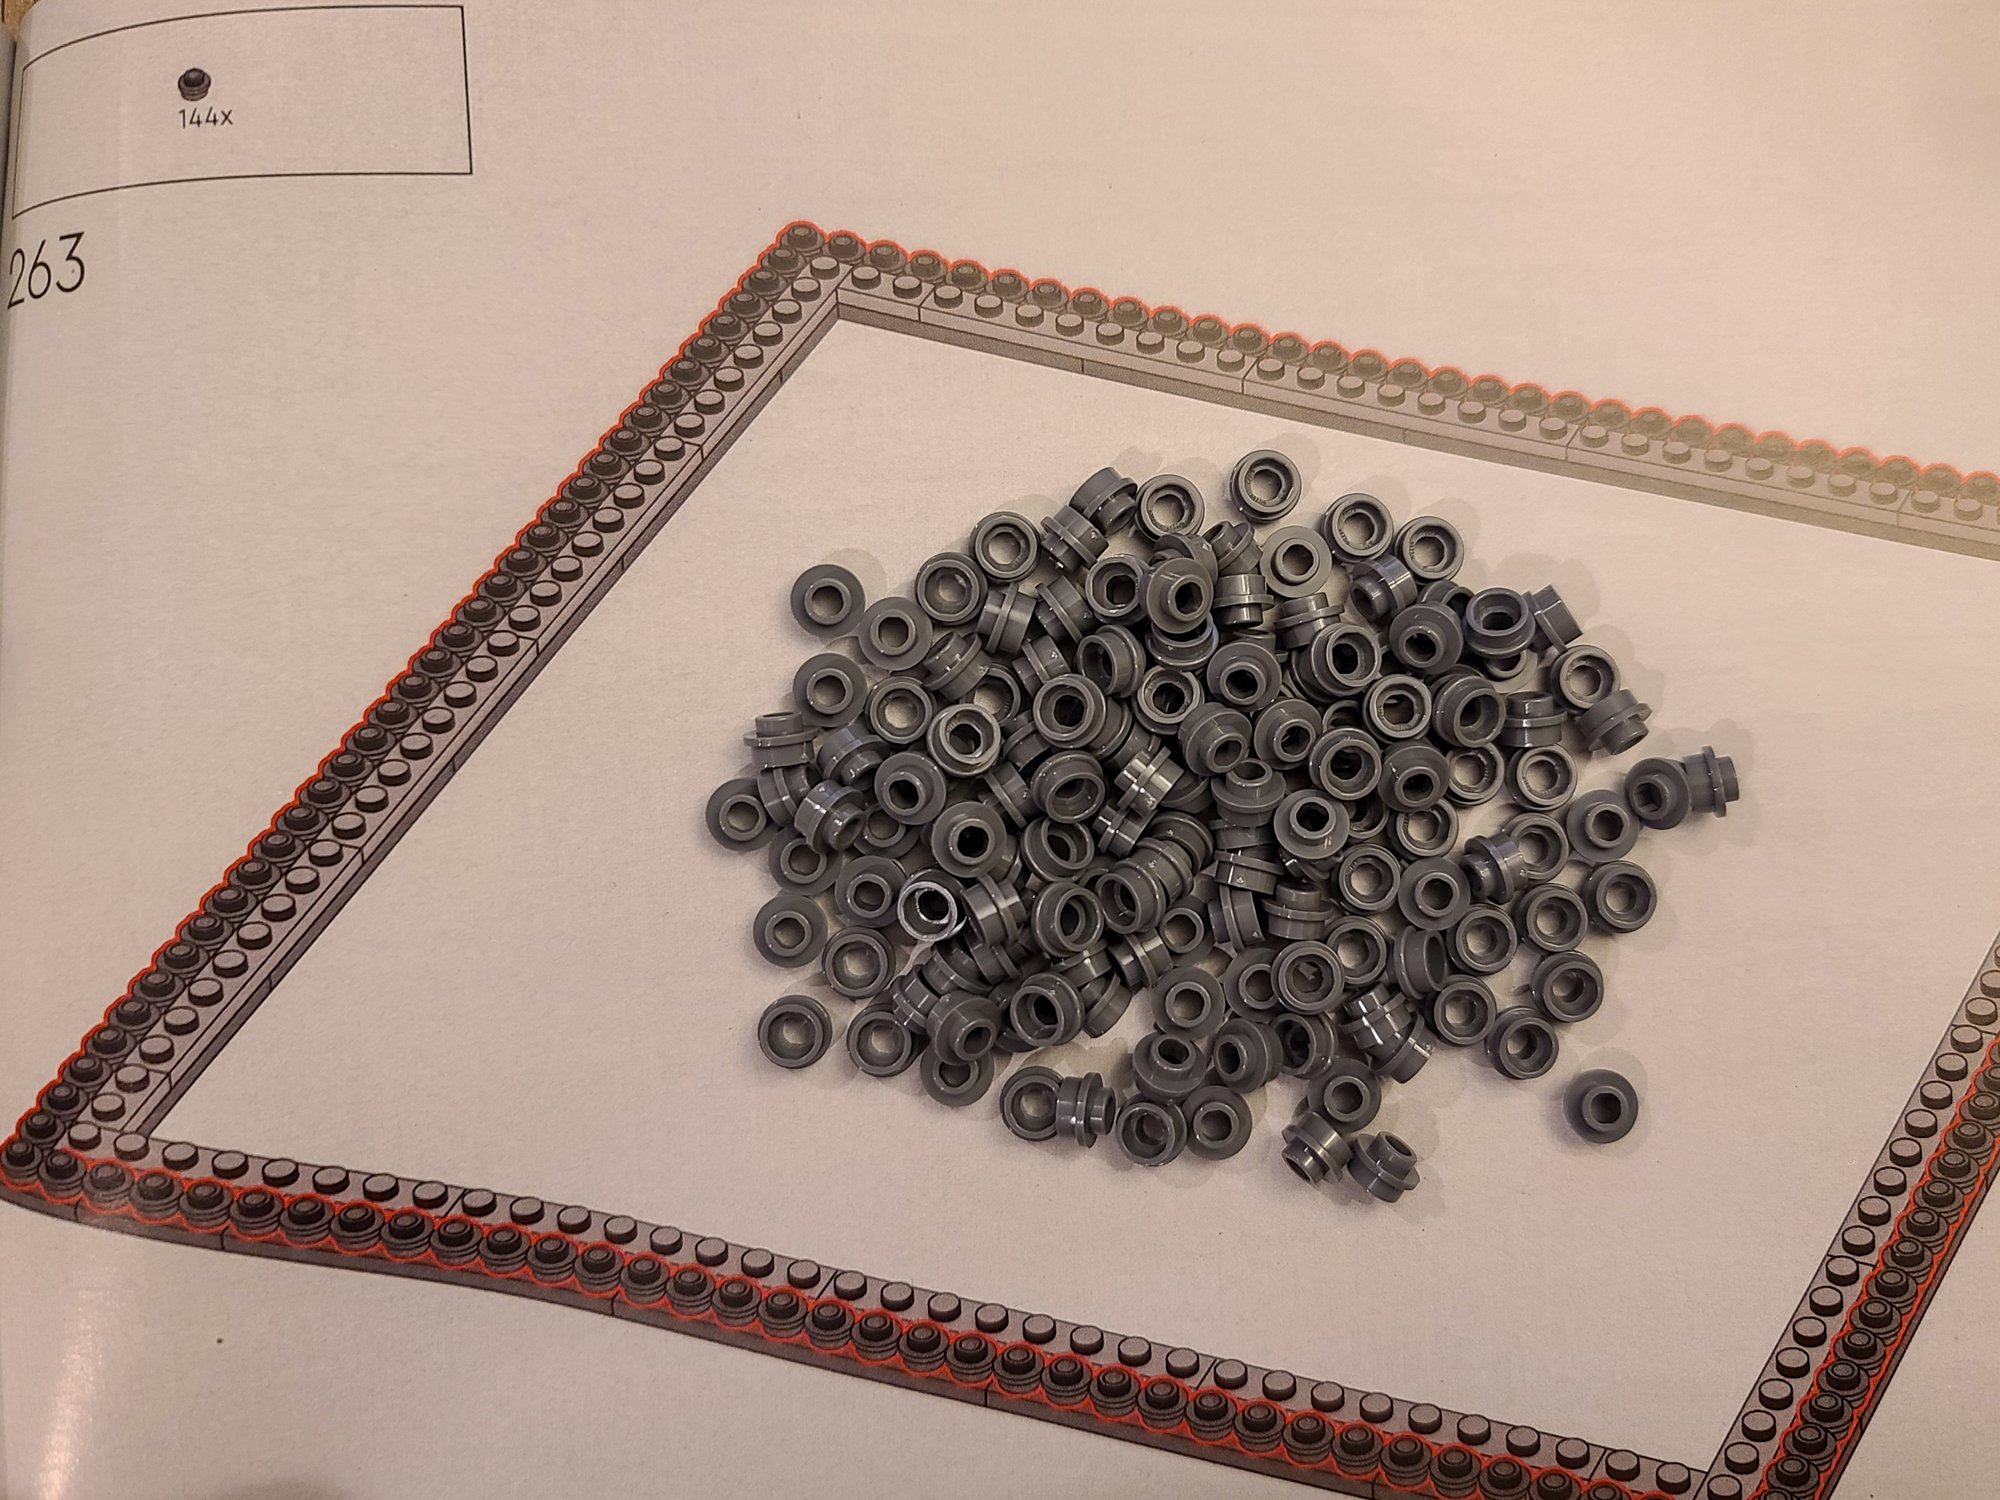 Another bulk pick with 144 Apollo studs in one step!